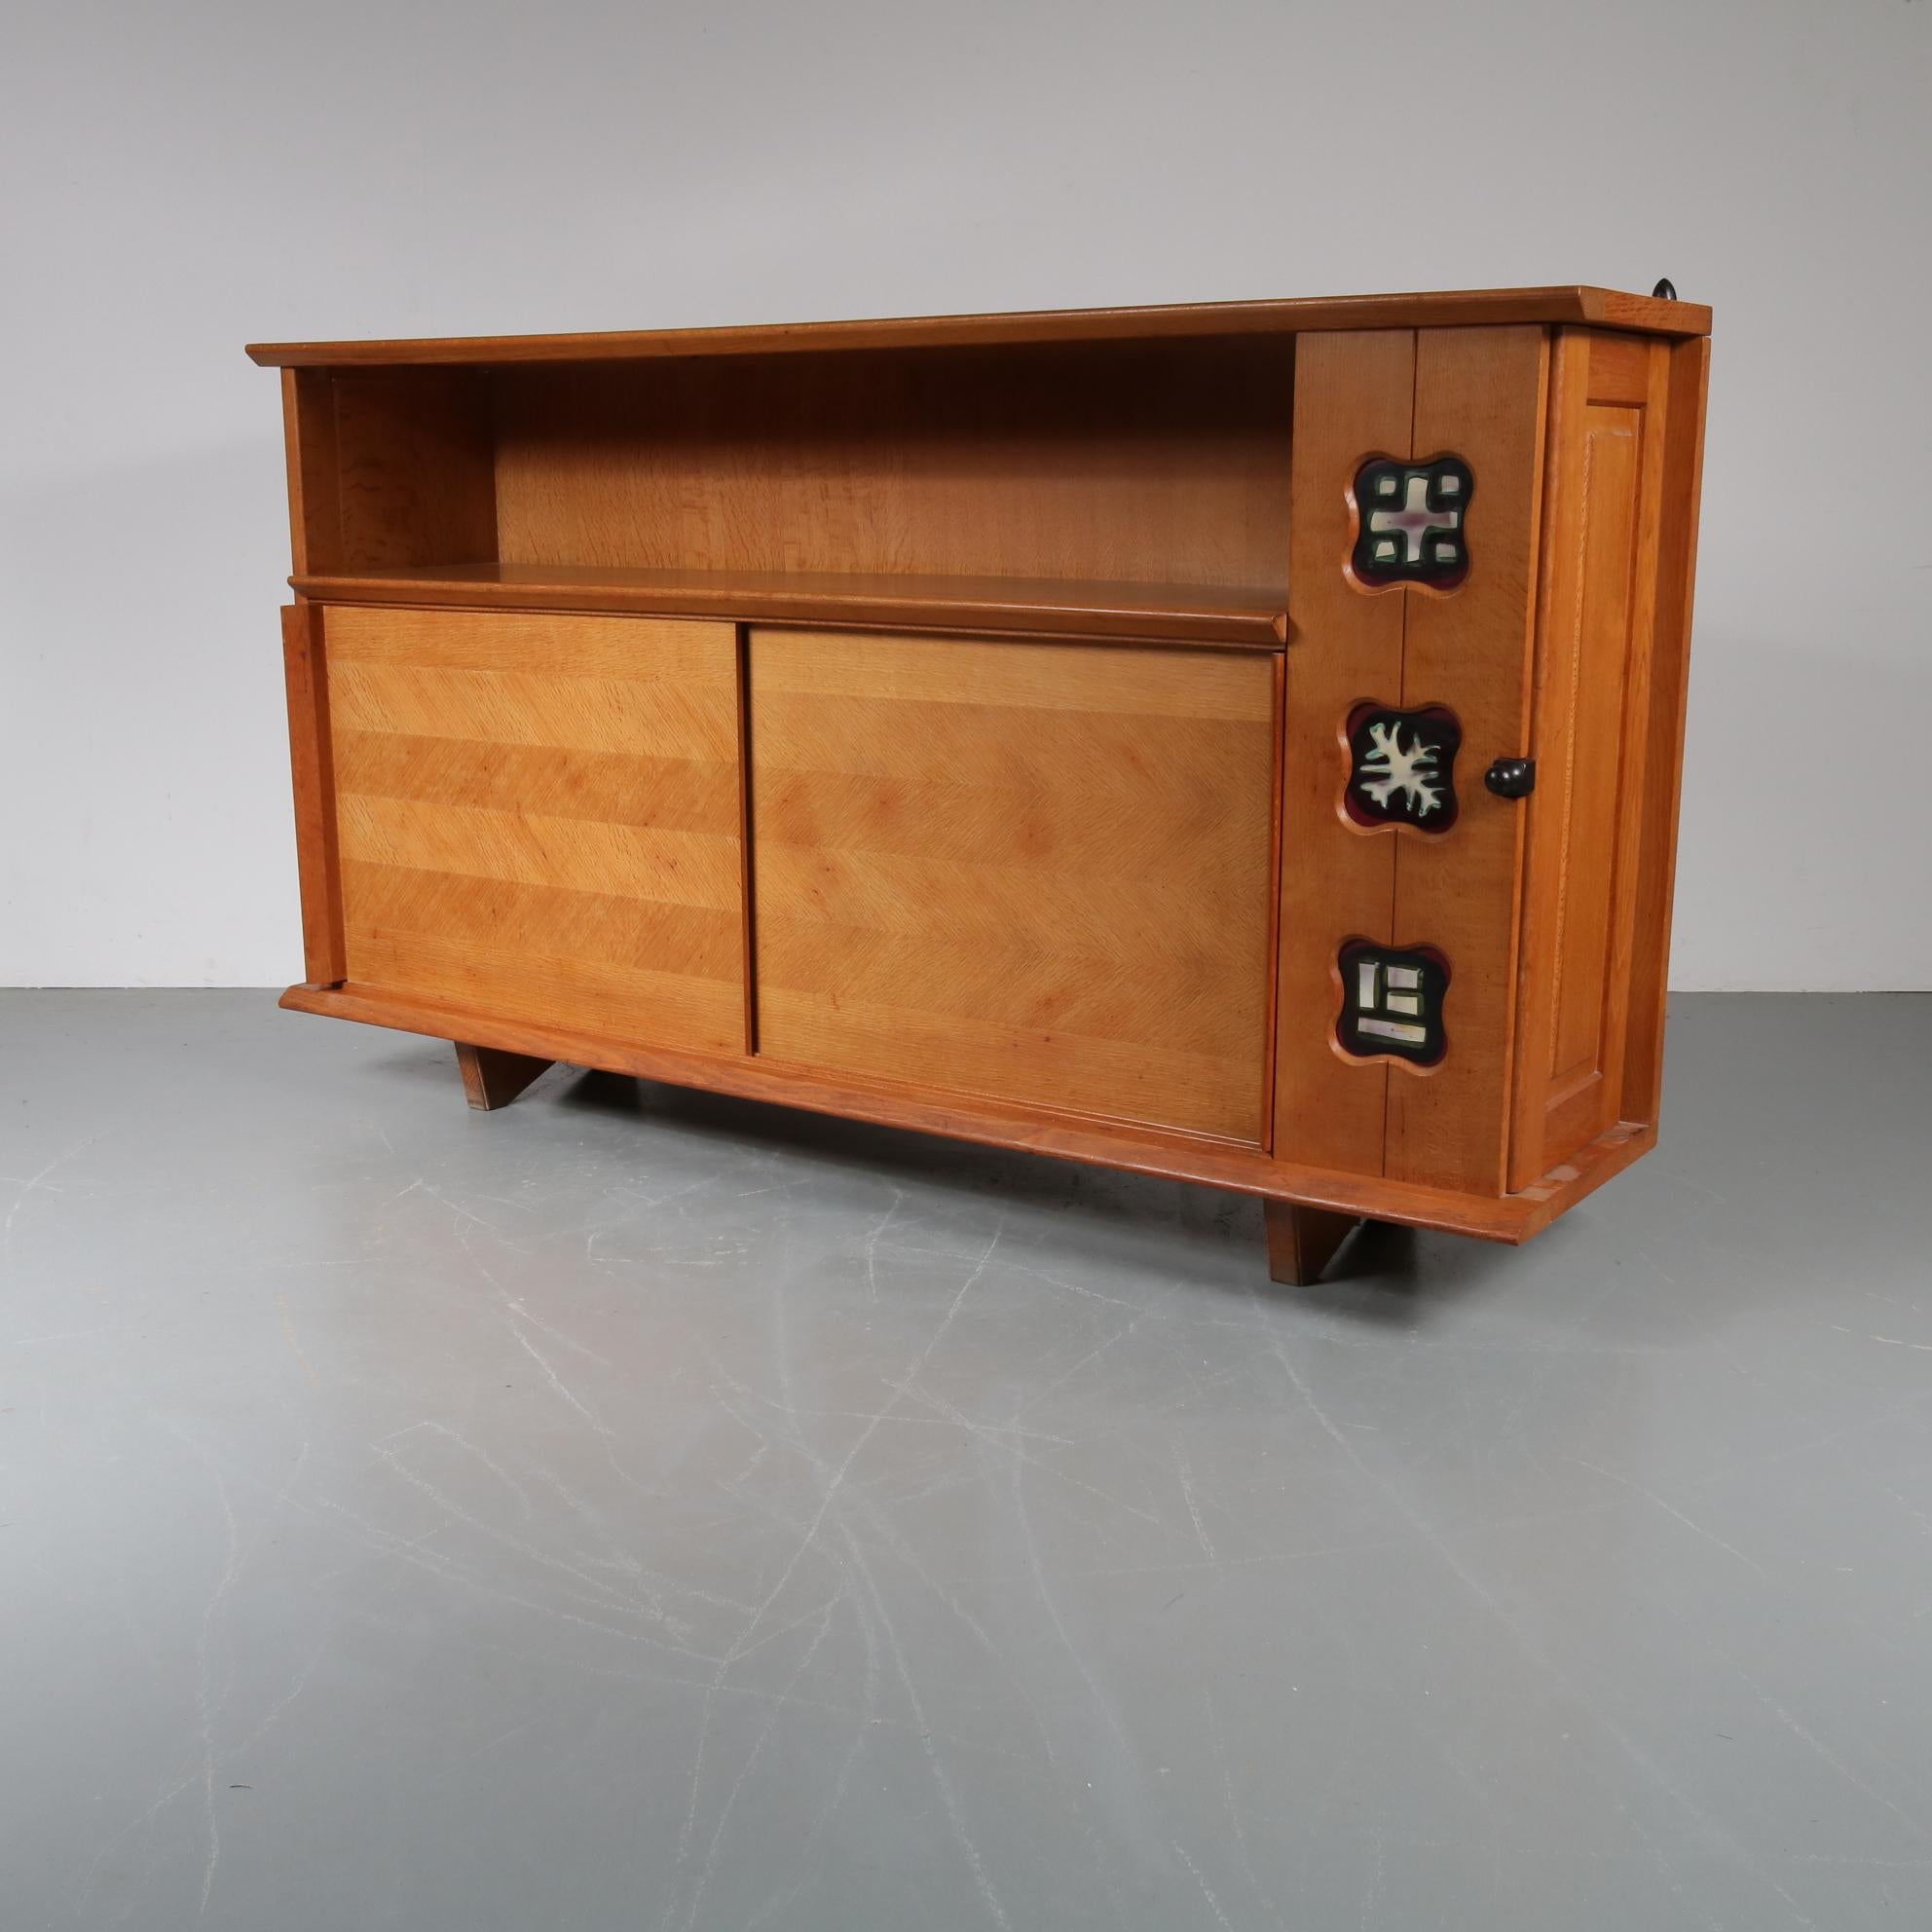 A rare sideboard designed by Guillerme et Chambron, manufactured in France, circa 1950.

Made of high quality oak with a beautiful rustic style and ceramics inlay in the side and top. The ceramics have beautiful, decorative patterns that add a